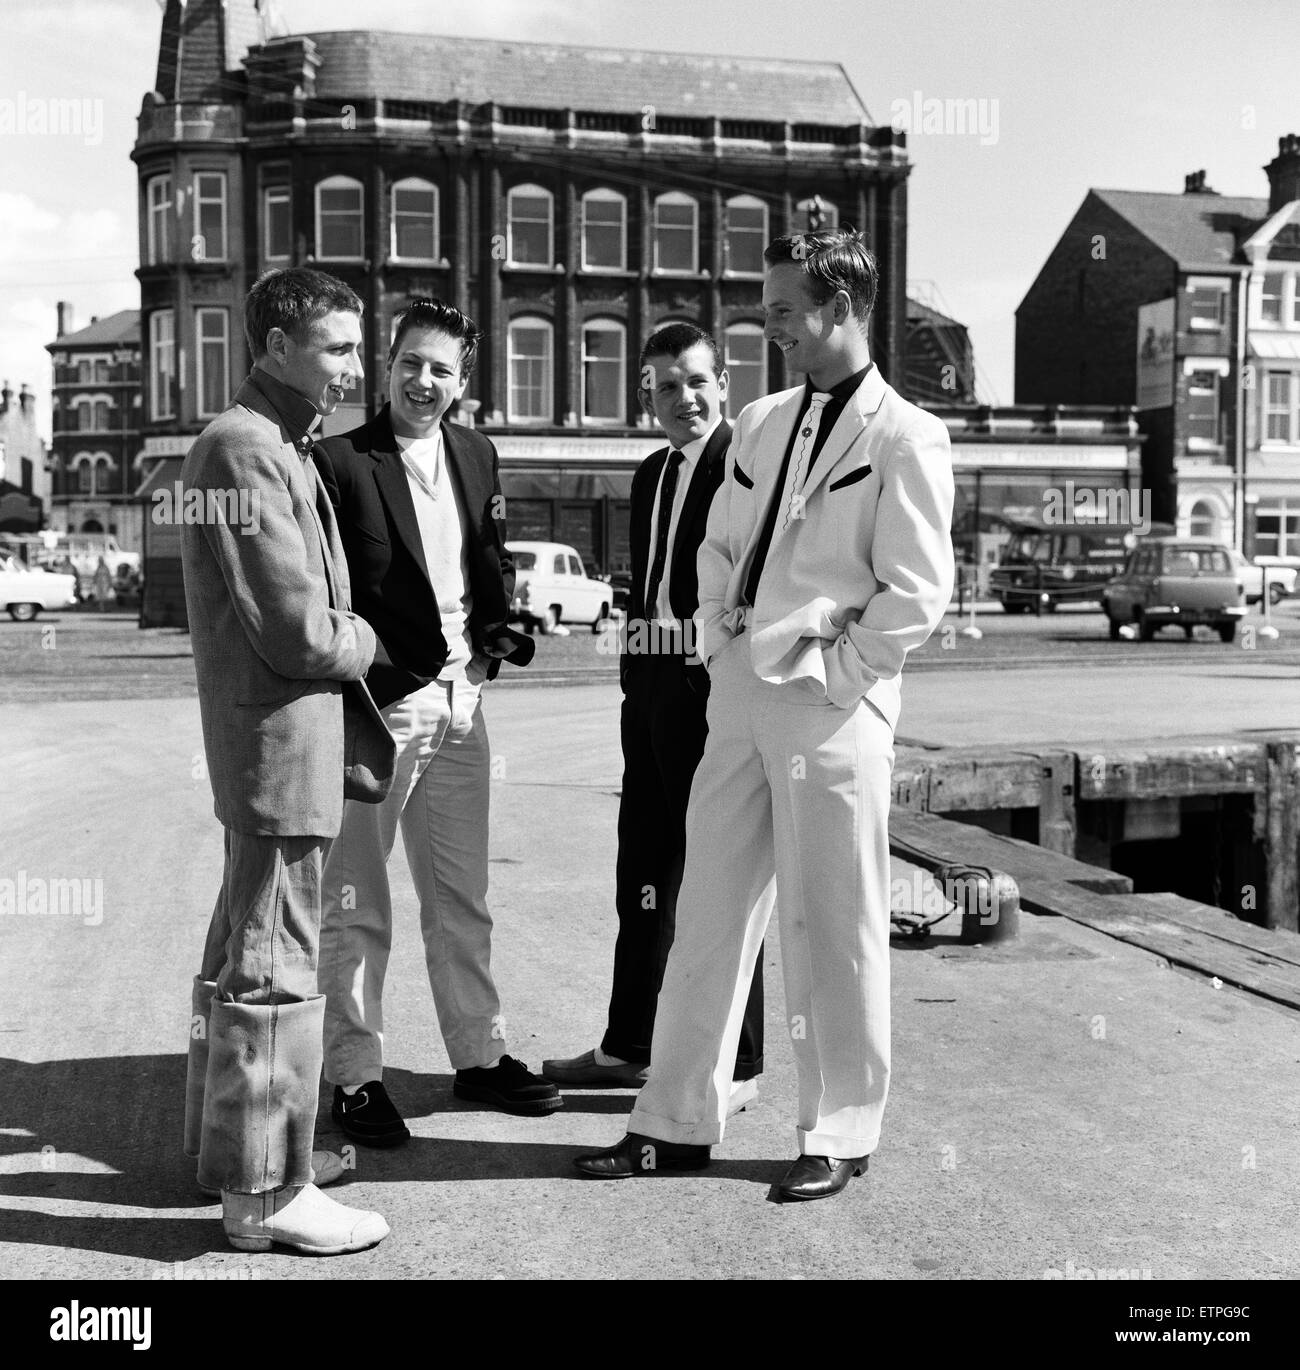 A new craze - Fancy suits worn by trawler fishermen at Lowestoft, Suffolk. Hylton Brighty, aged 16, wearing a white suit trimmed with black. 19th July 1961. Stock Photo